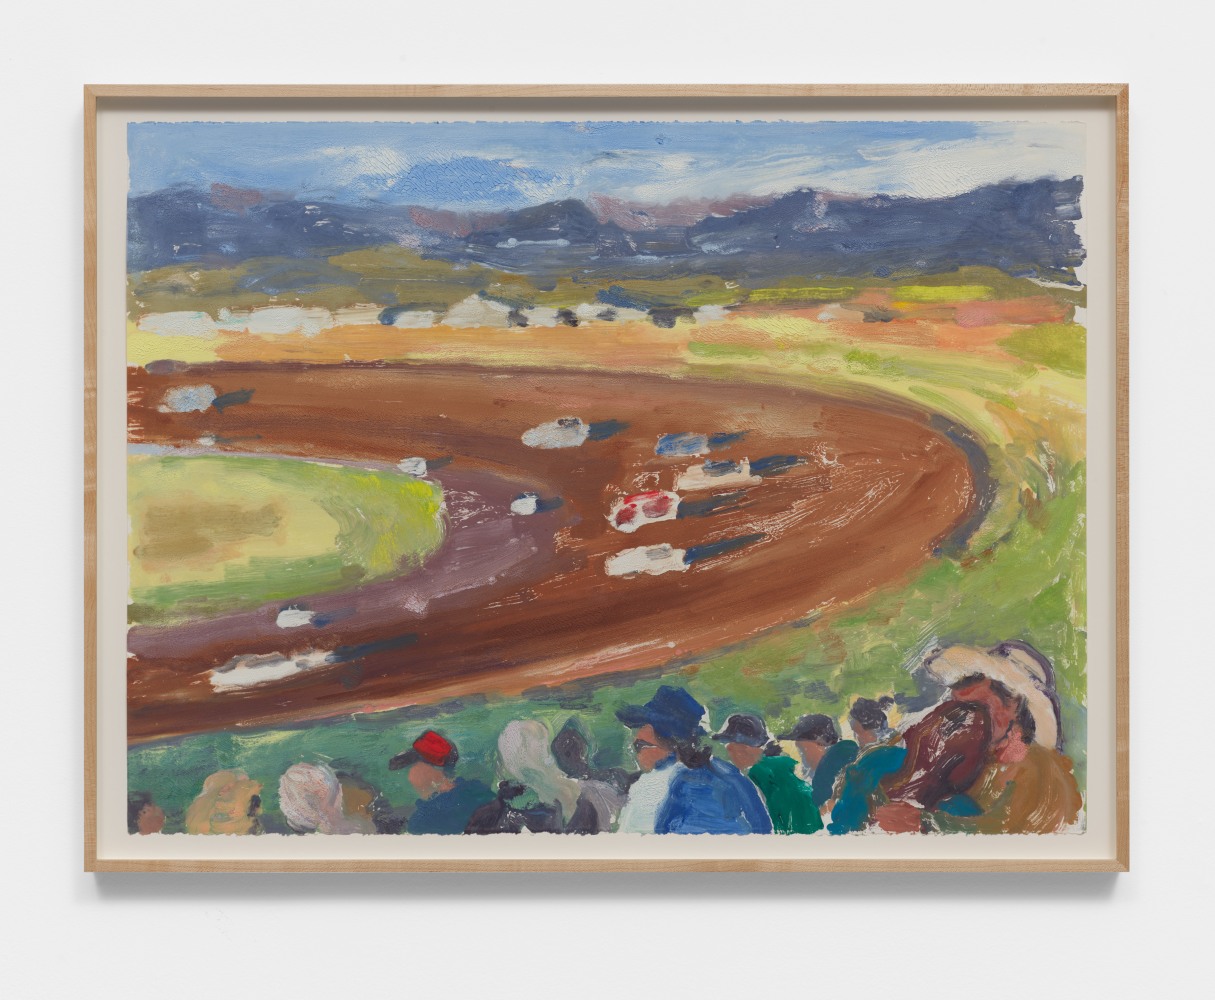 Brian Lotti

Victory Lap (Western Edition), 2021

Oil on Stonehenge paper

22h x 30w in
55.88h x 76.20w cm